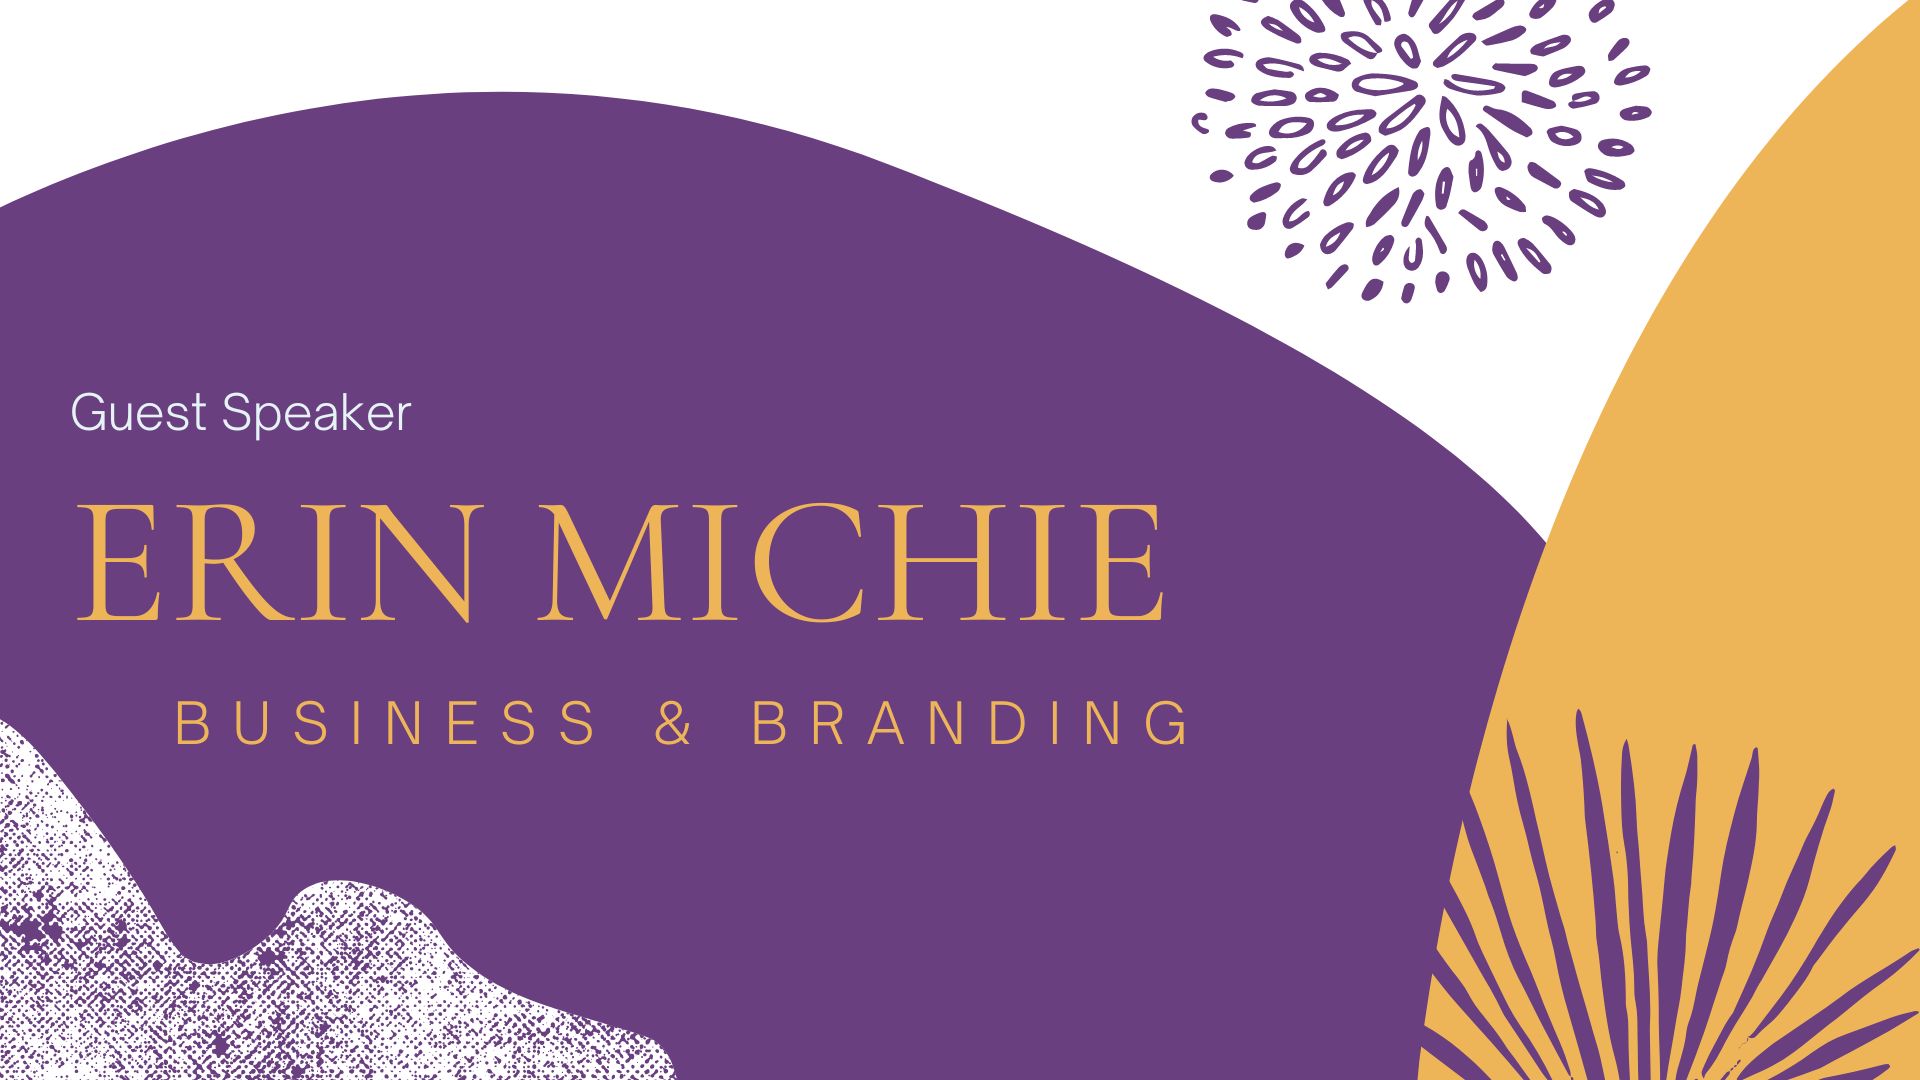 Business and Branding: Guest Speaker Erin Michie